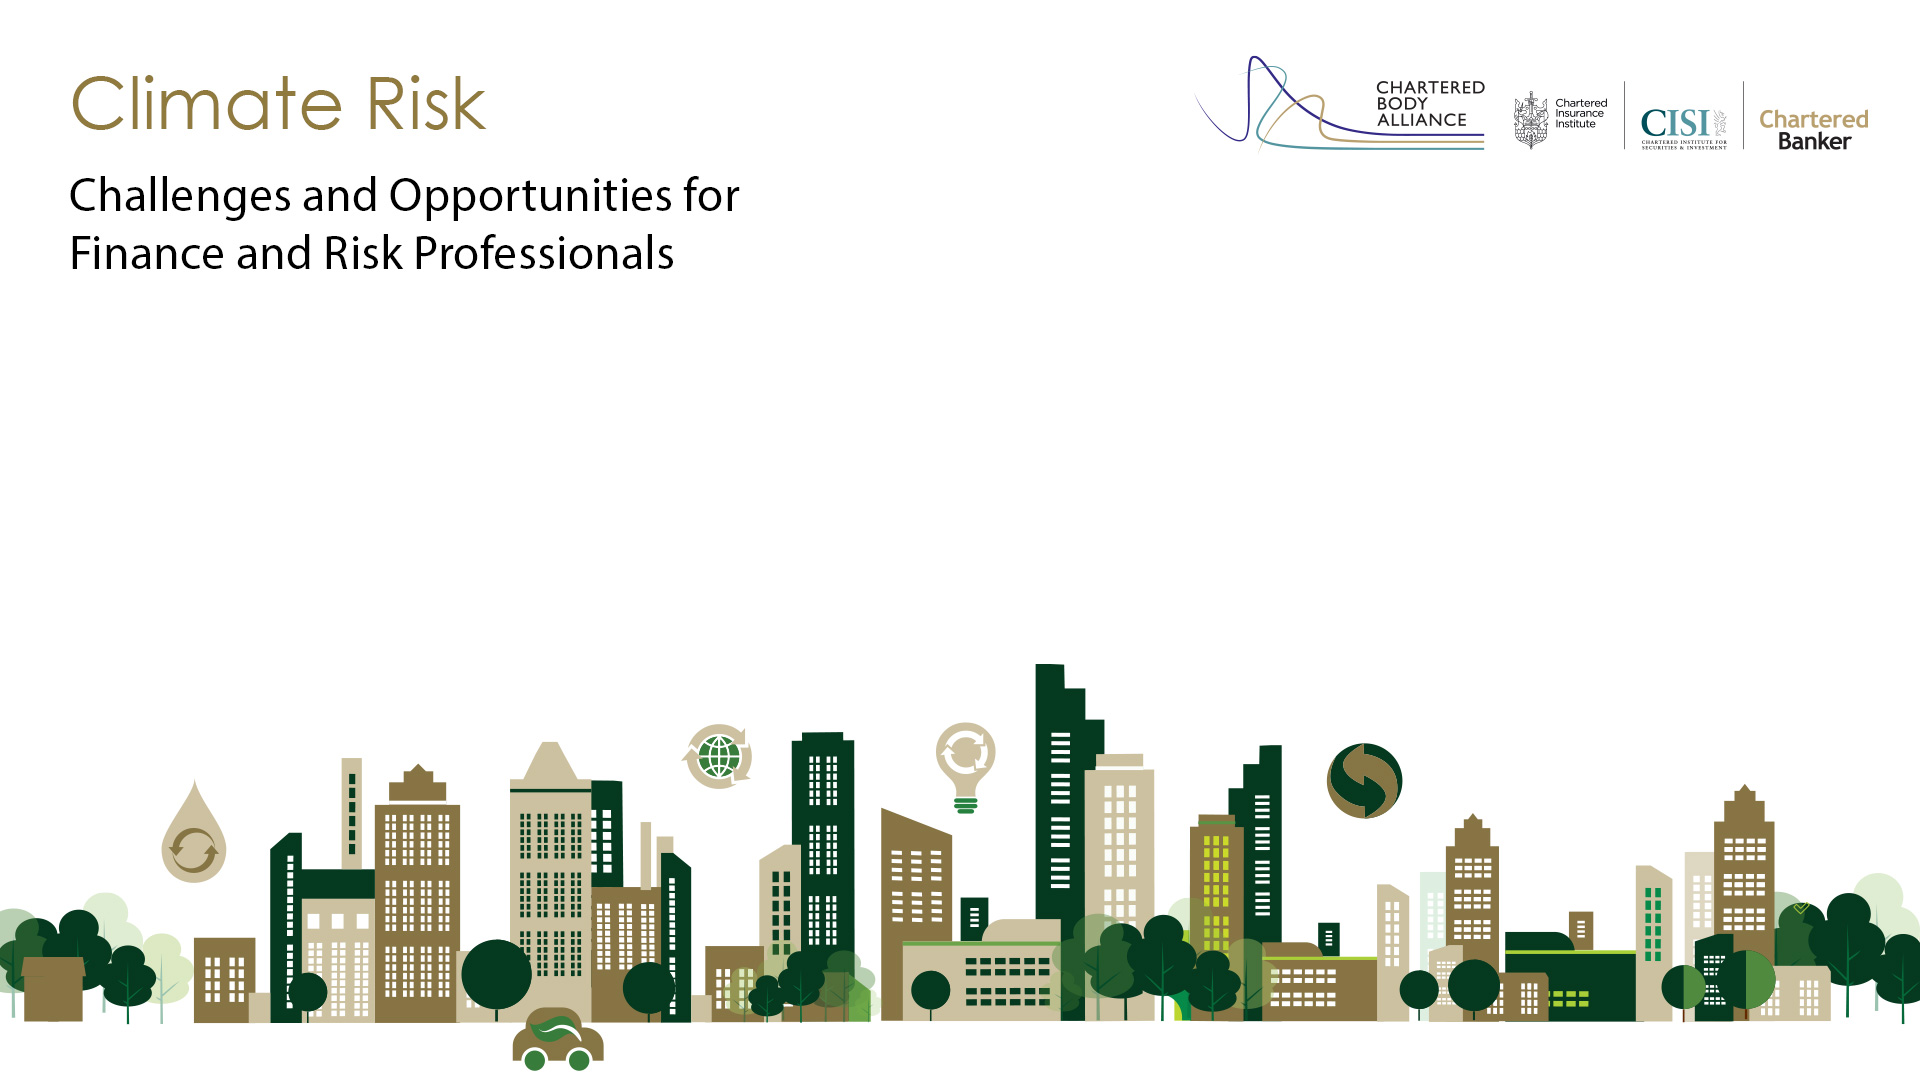 Climate Risk – Challenges and Opportunities for Finance and Risk Professionals